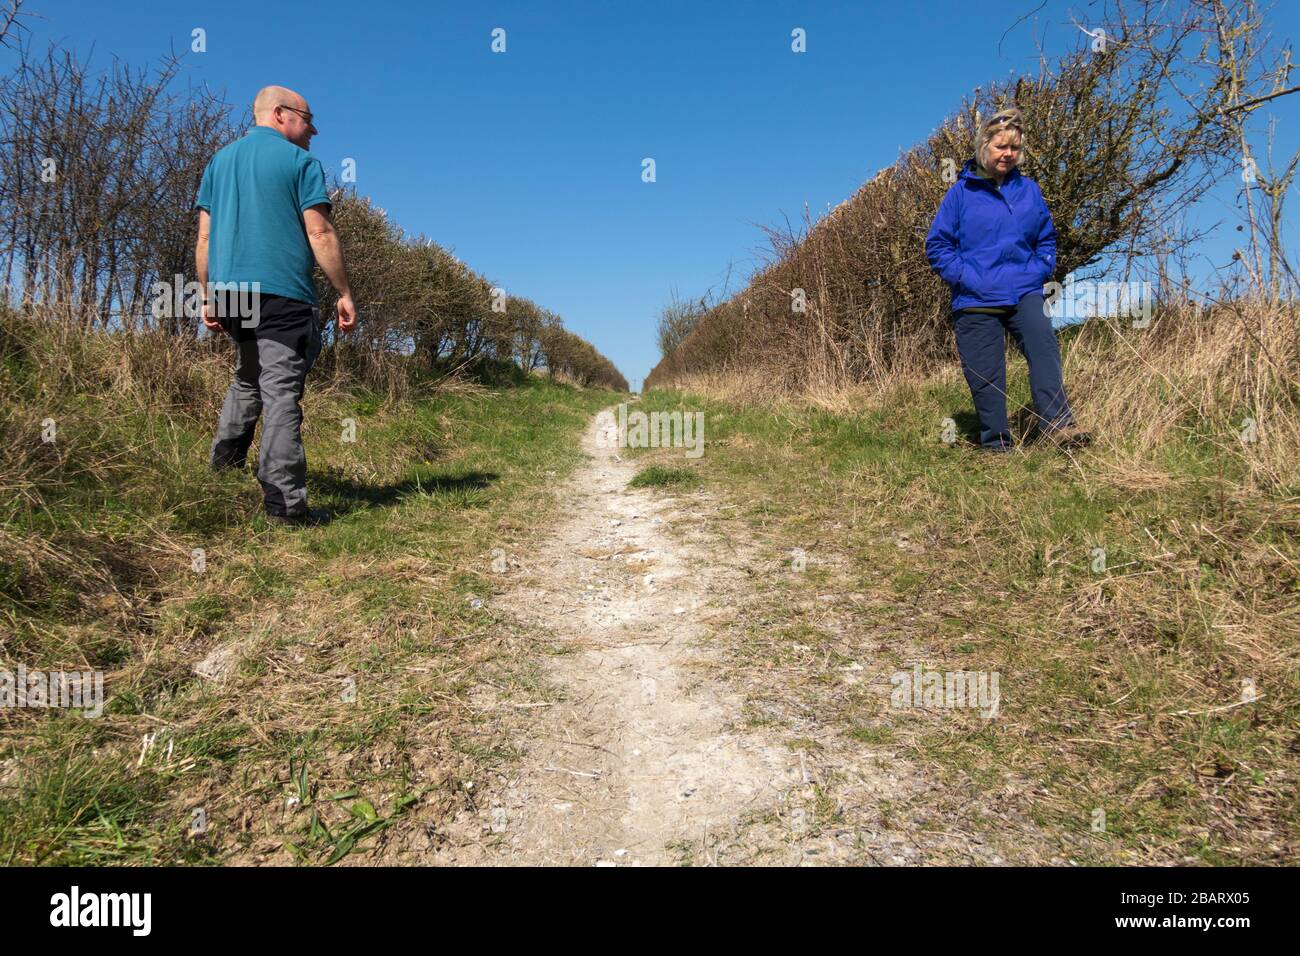 Two walkers keeping a safe distance from each other during coronavirus, East Garston, West Berkshire, England, United Kingdom, Europe Stock Photo